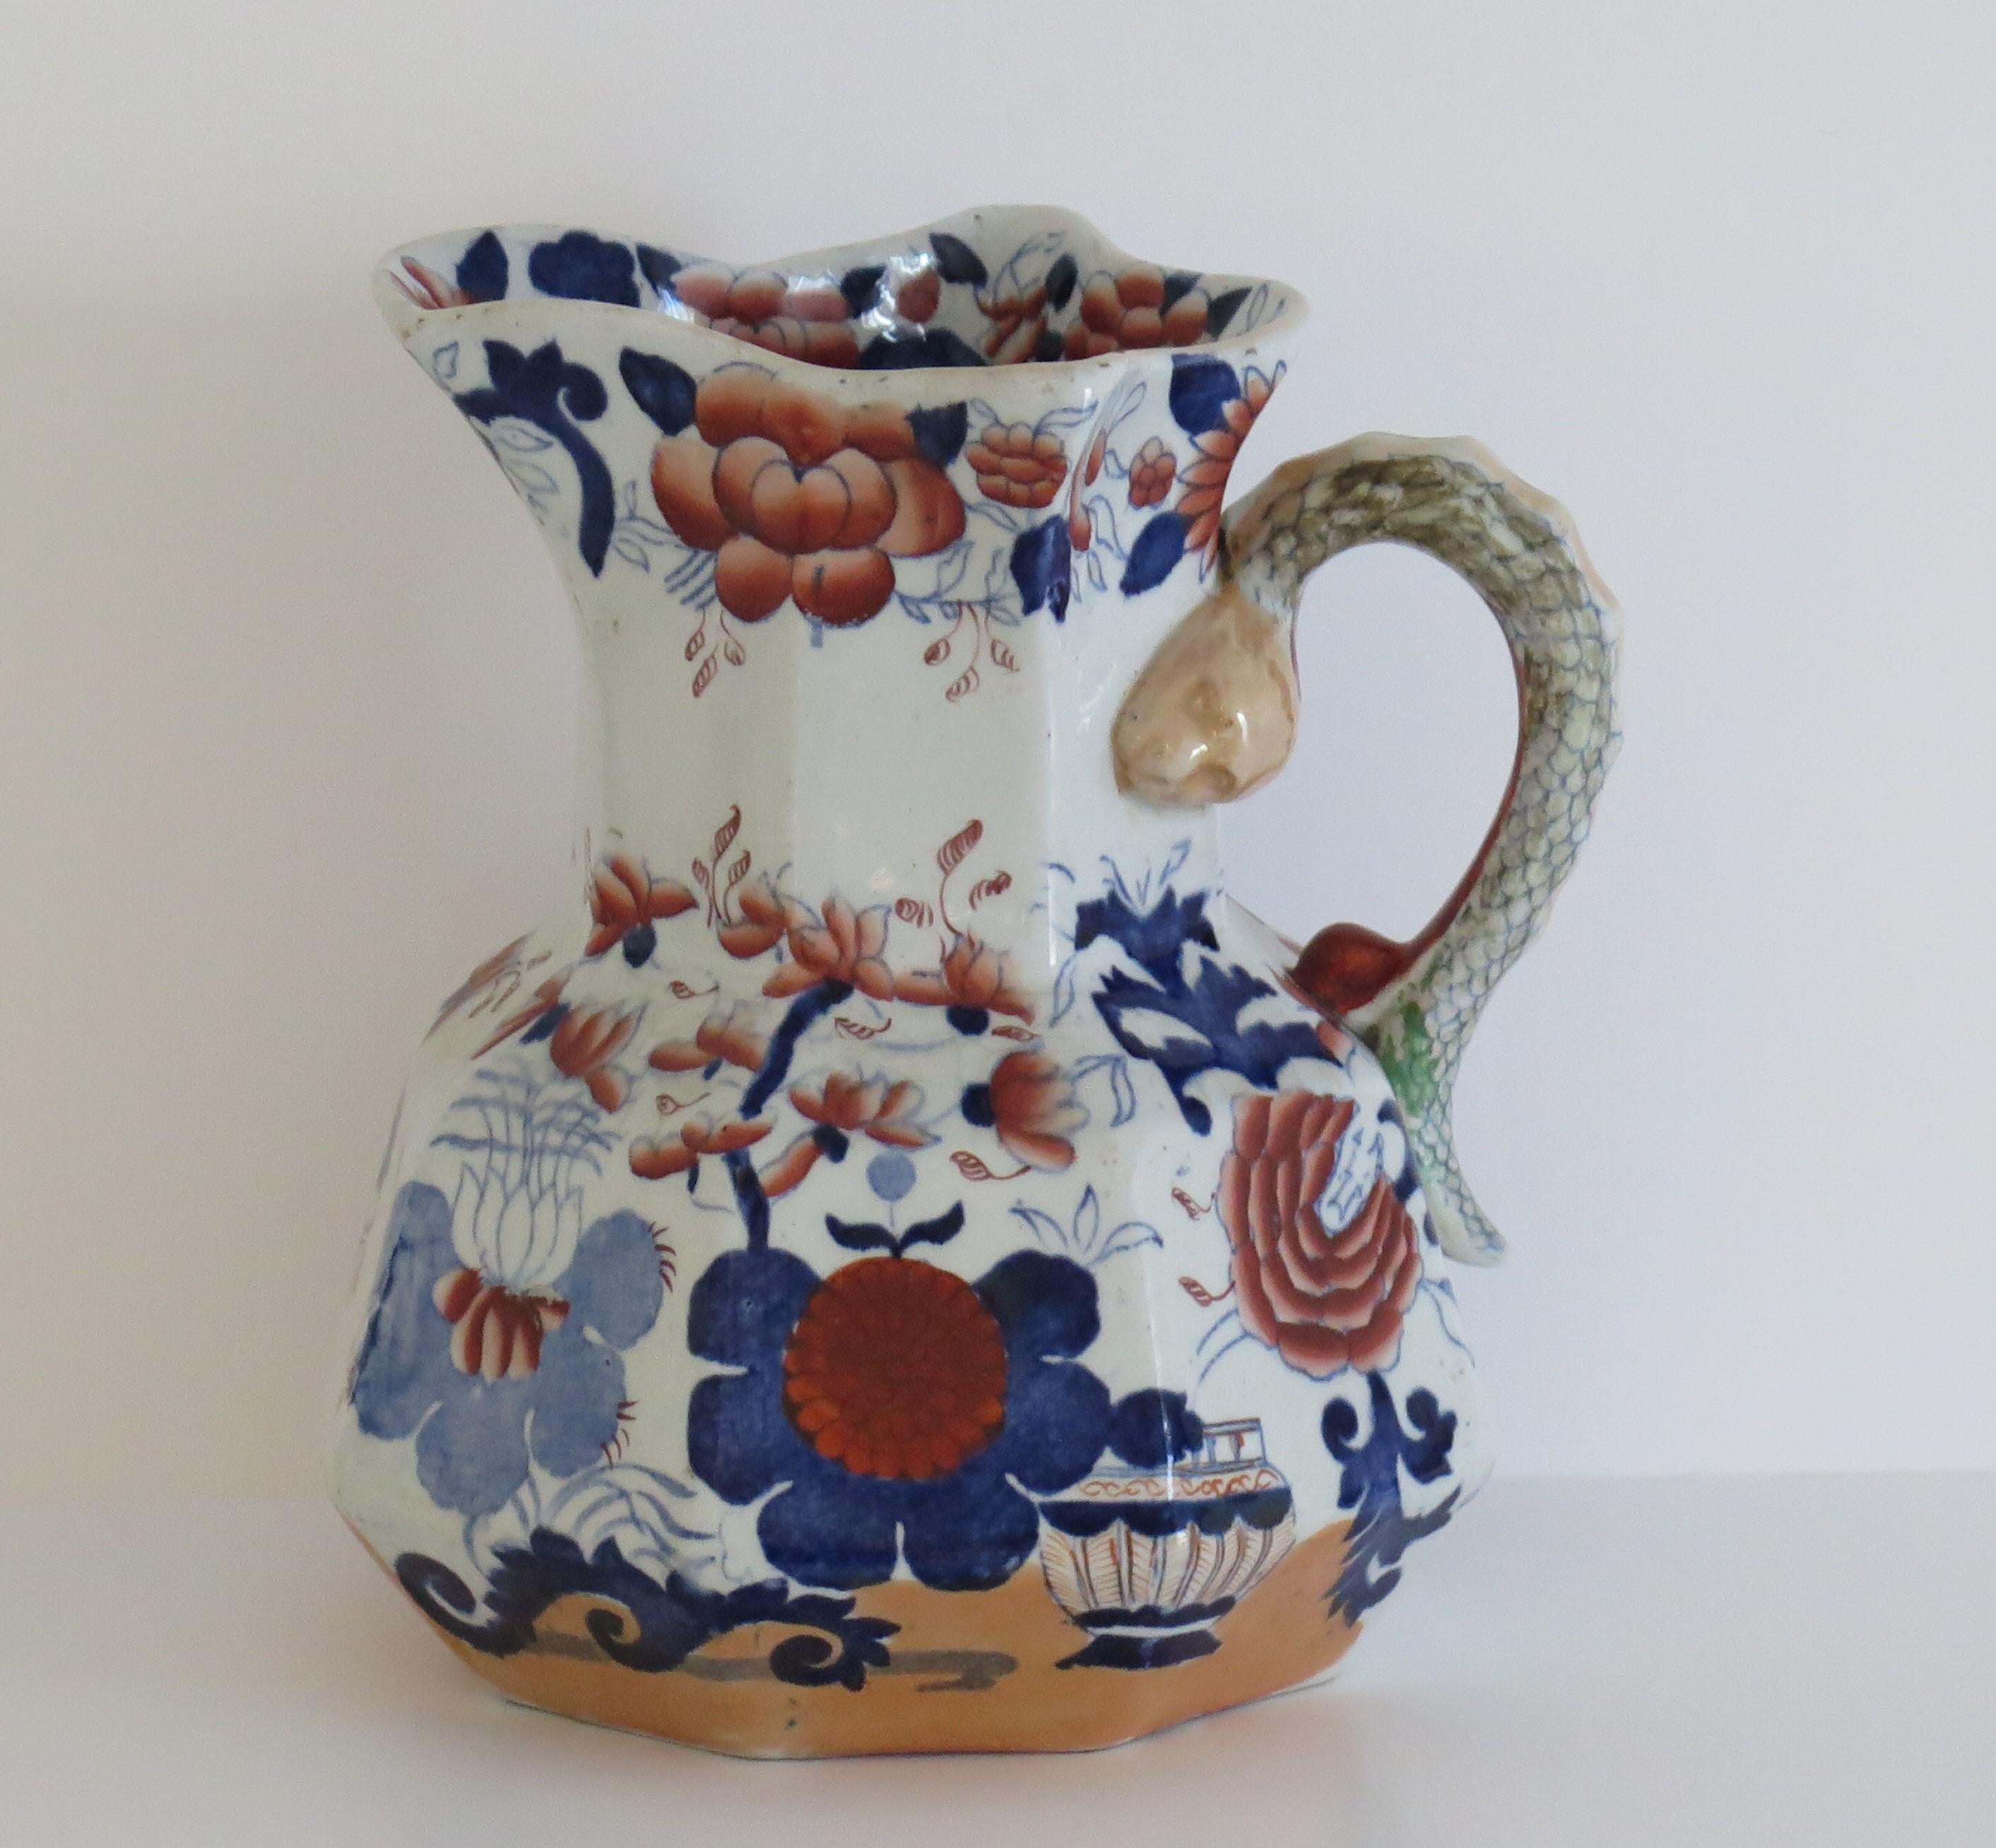 This is a good and very large Mason's Ironstone Hydra jug or pitcher in the Basket Japan pattern, made in England circa 1830 and is particularly decorative, and a much larger size than we normally see.

The jug has the octagonal 